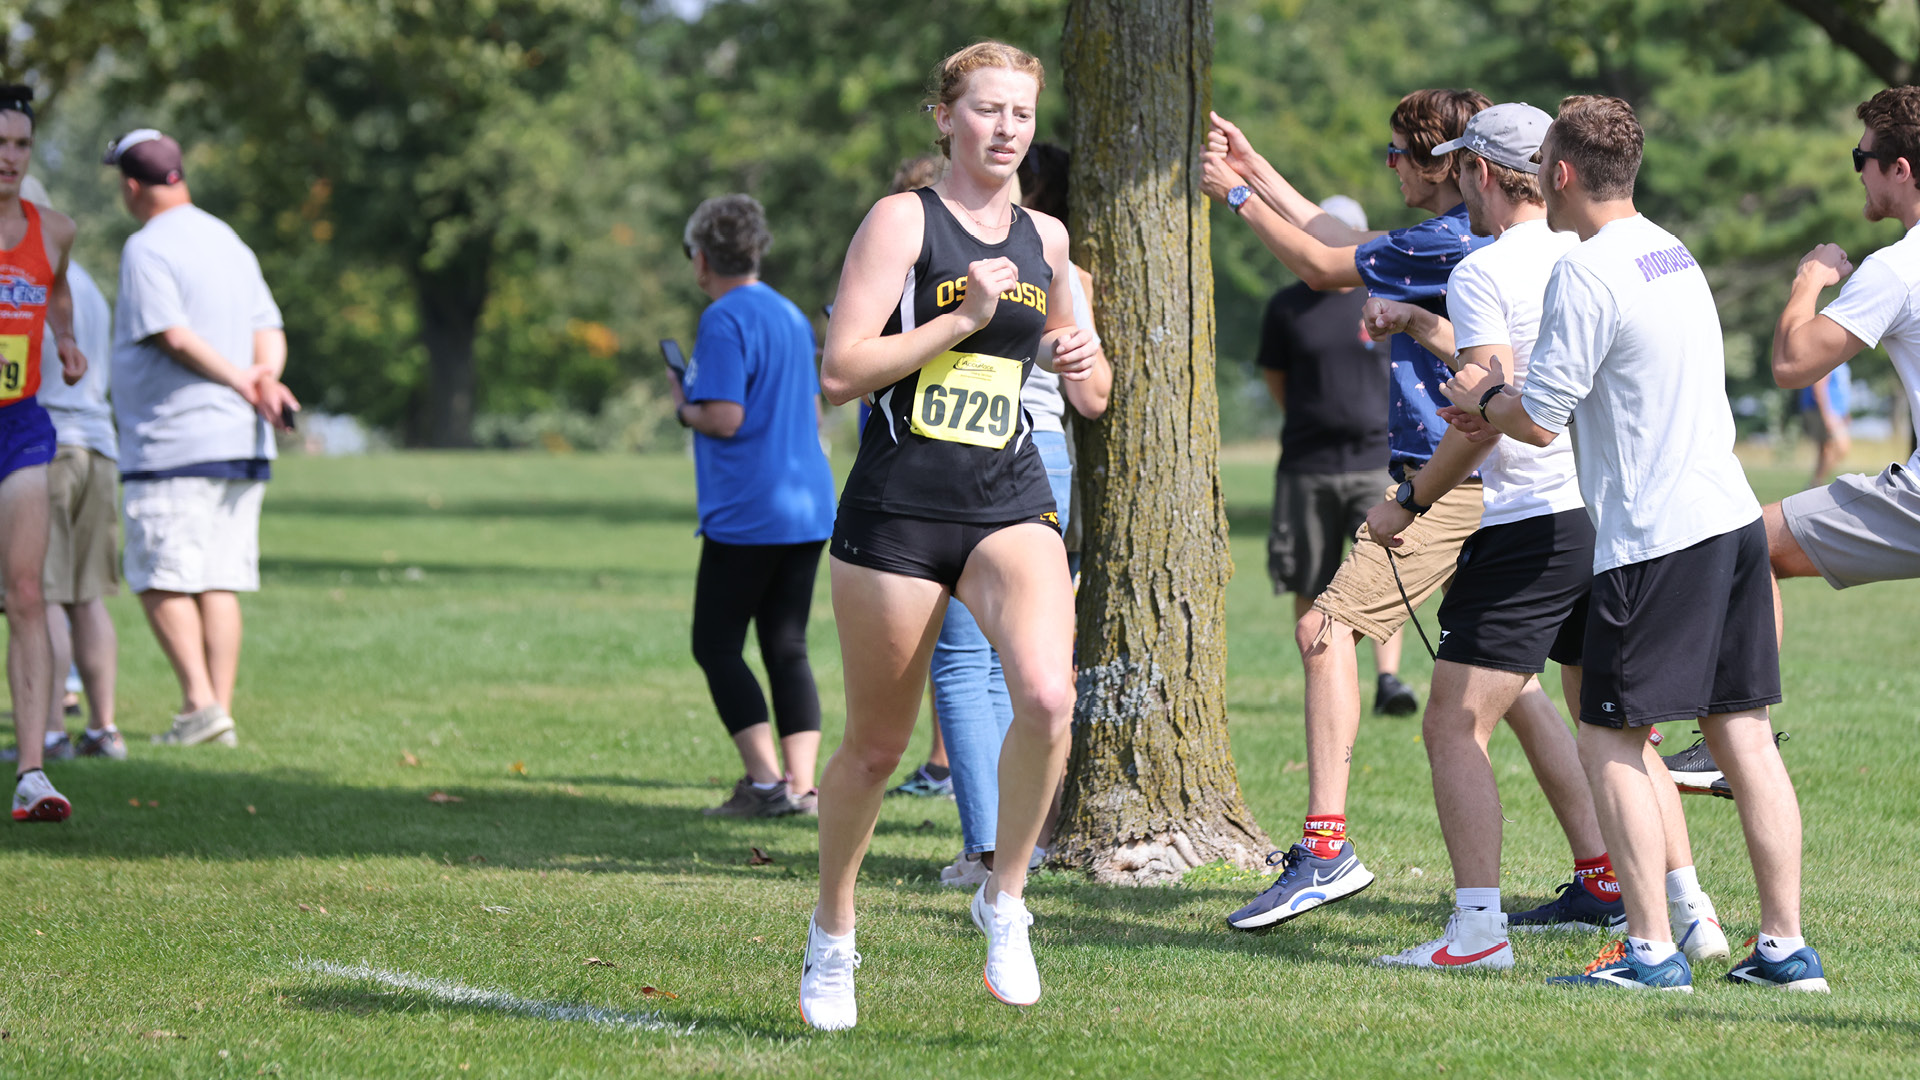 Madigan led the Titans with a 23:33, eighth place finish at the Blugold Invitational